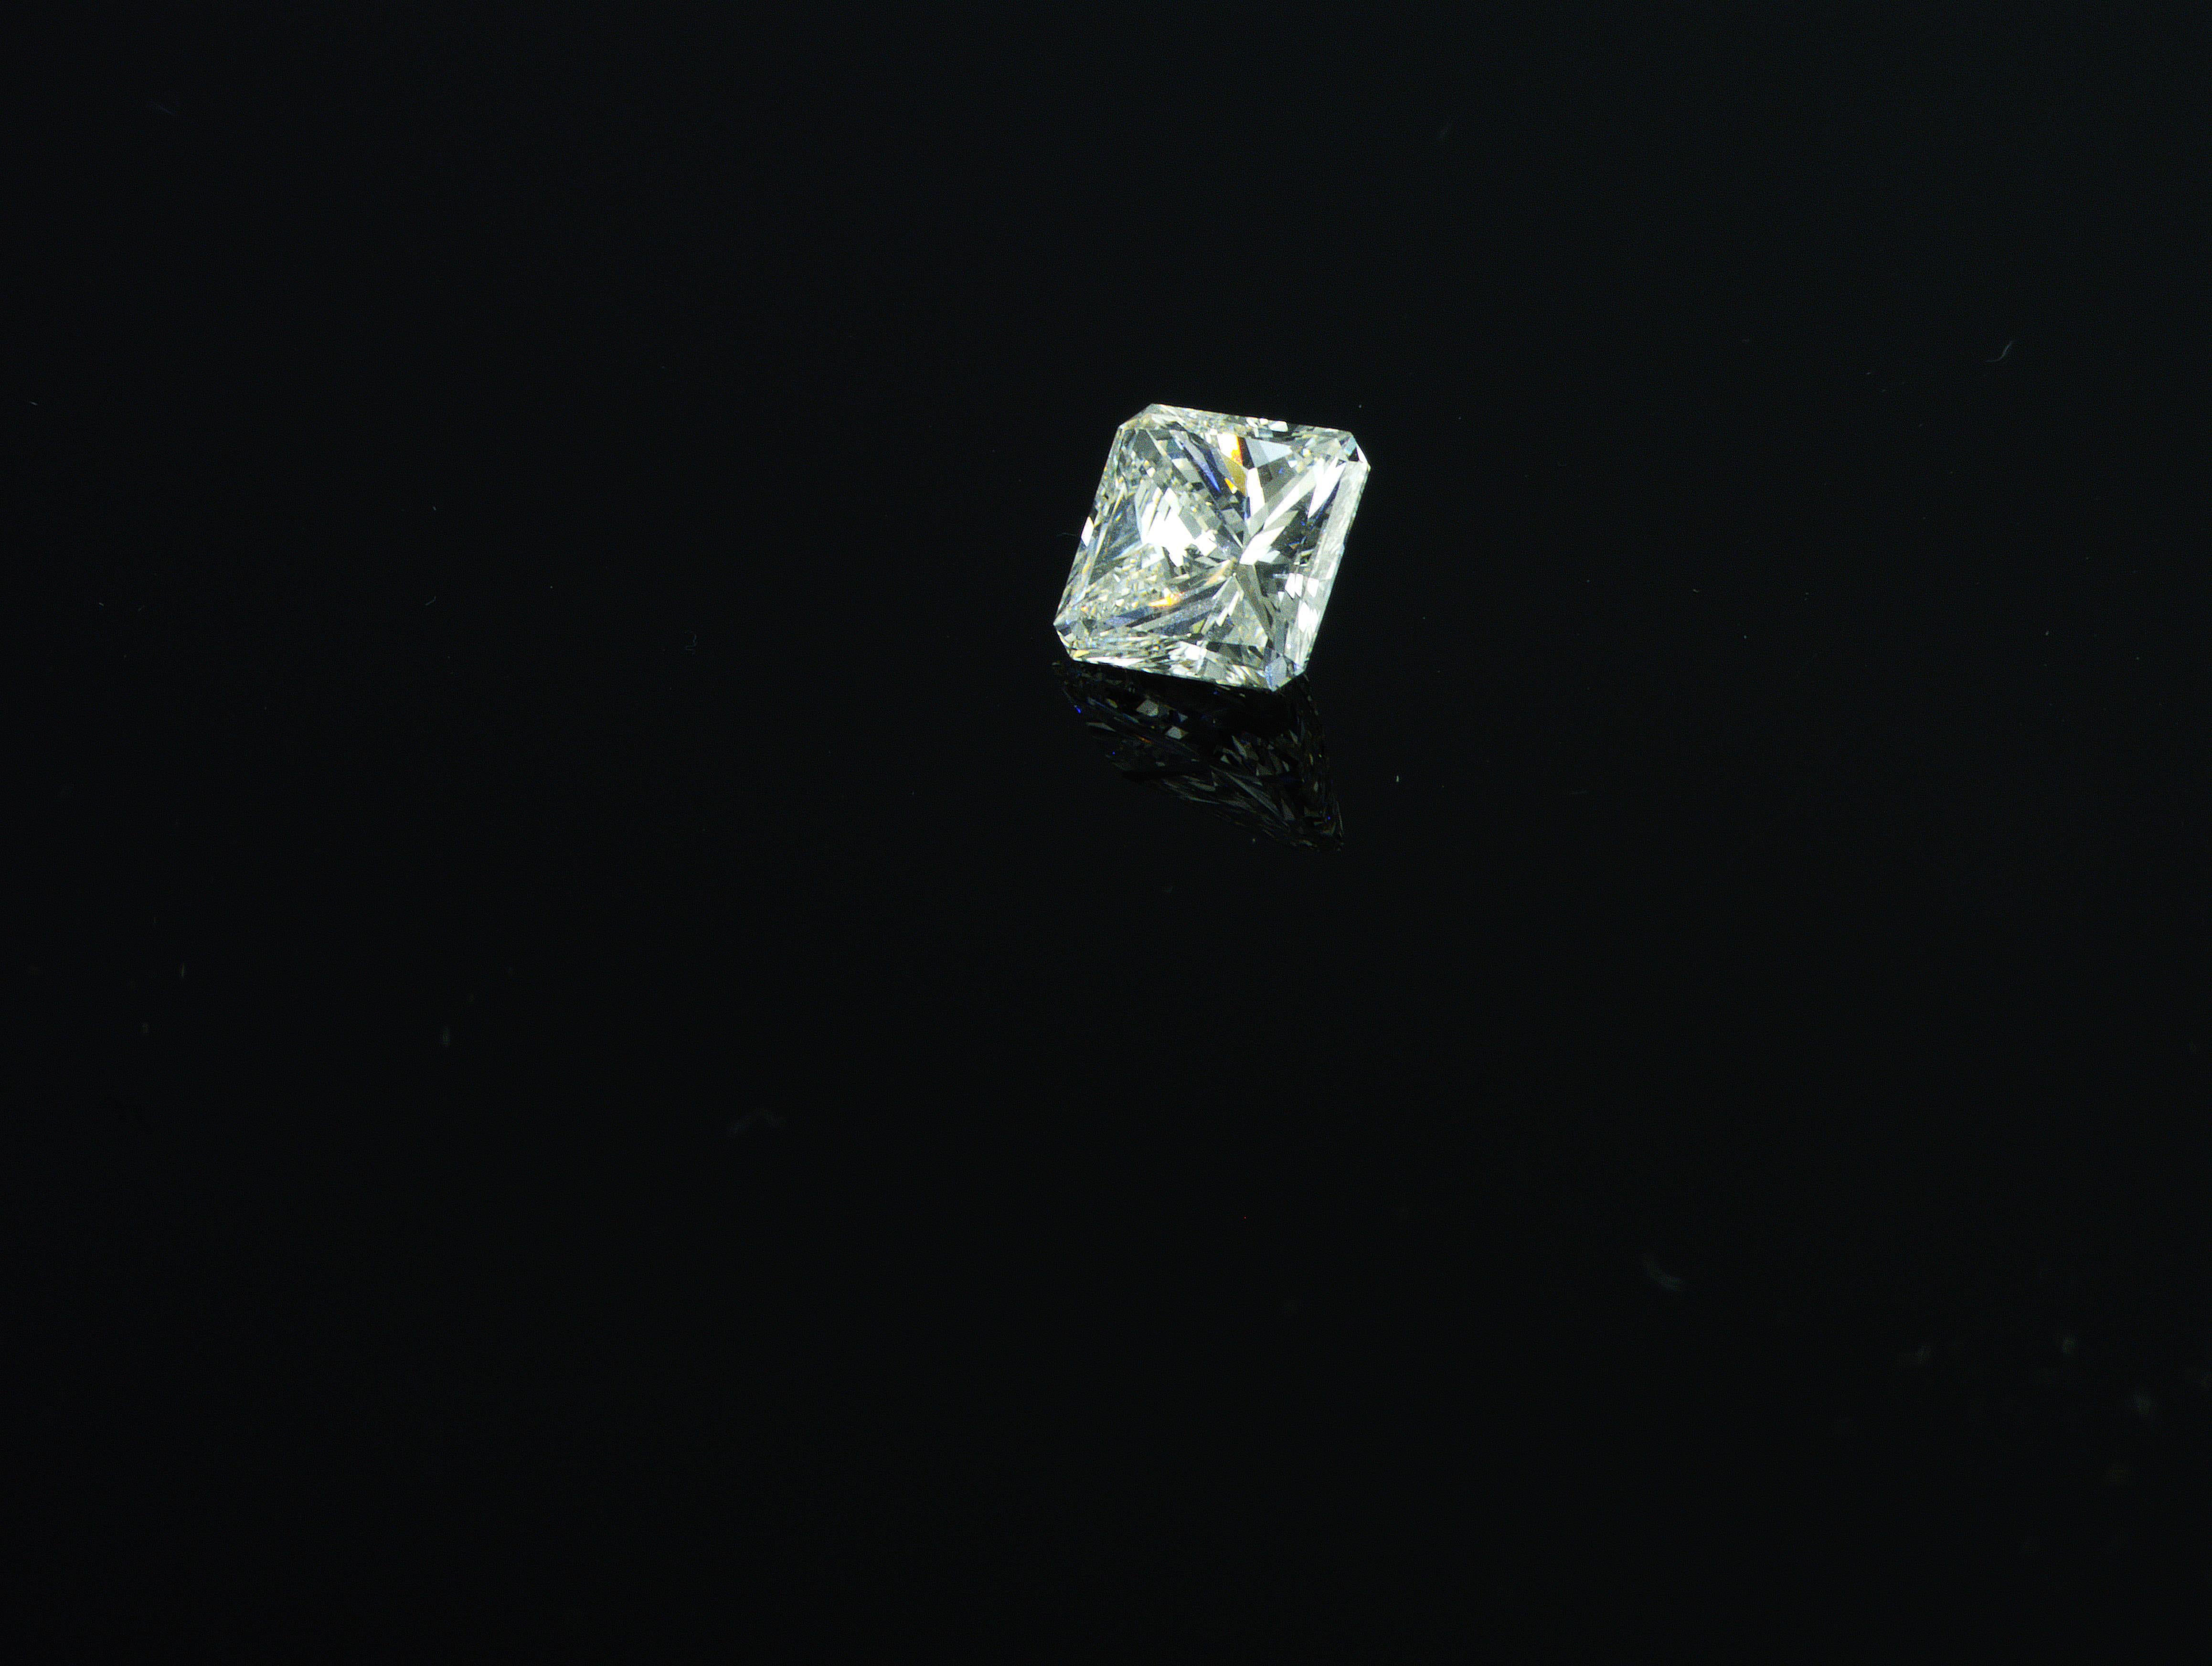 We are natural diamond production company located in Dubai.
Weight: 1.20ct
Shape: Square Radiant
Color: rare white (G)
Clarity: VVS1
Polish: Very Good
Symm: Good
Dimensions (mm): 6.28 x 6.13 x 4.06

HRDAntwerp  Report Number: 230000147726
